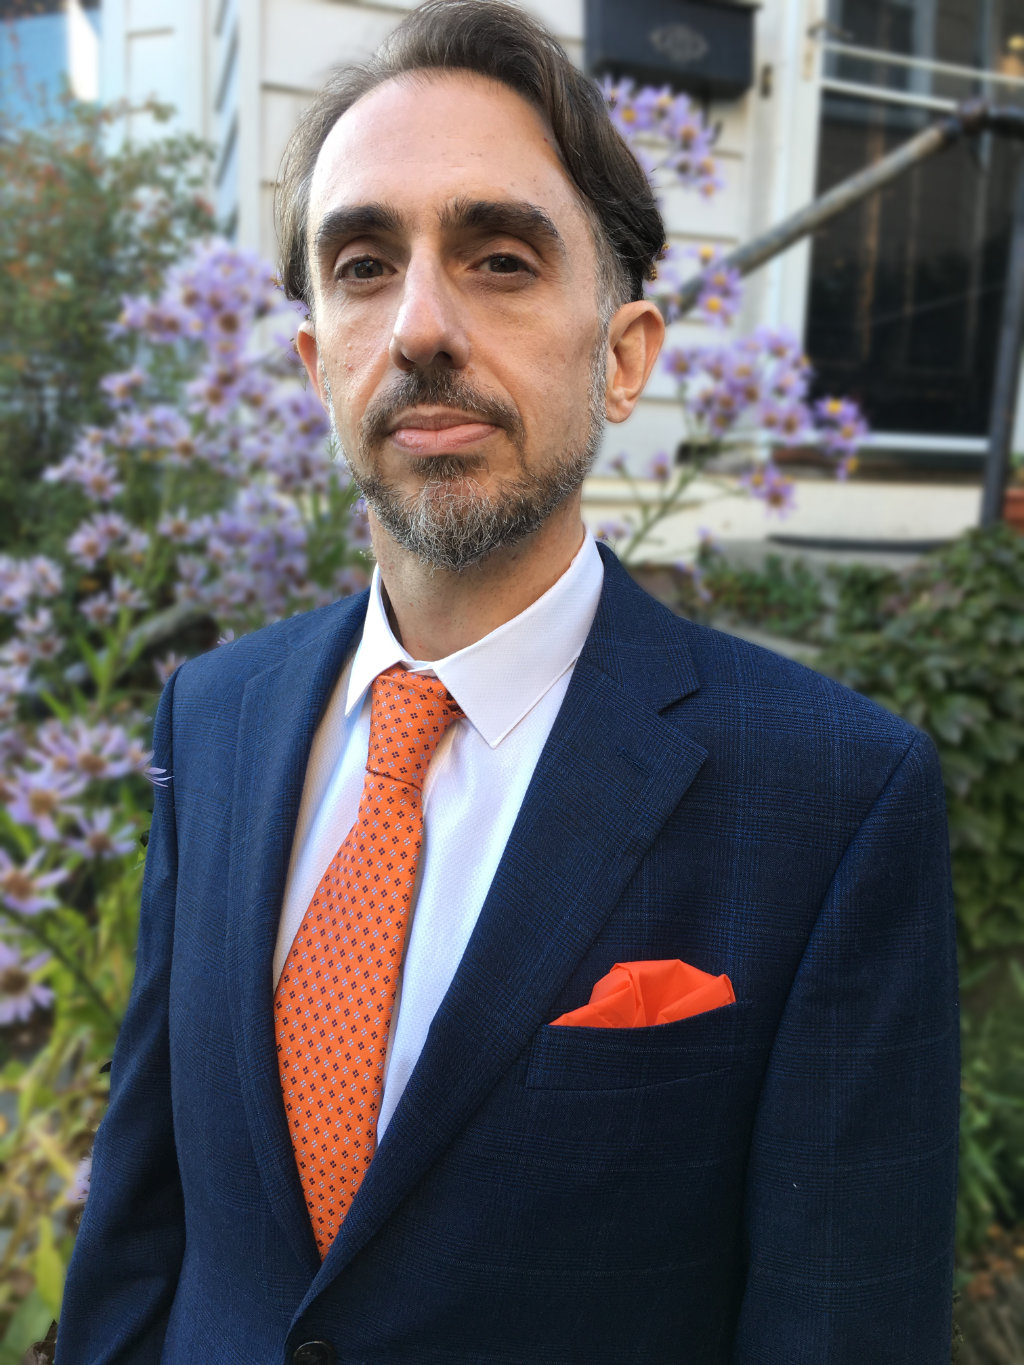 Photograph of Steve Hoey wearing a suit and tie